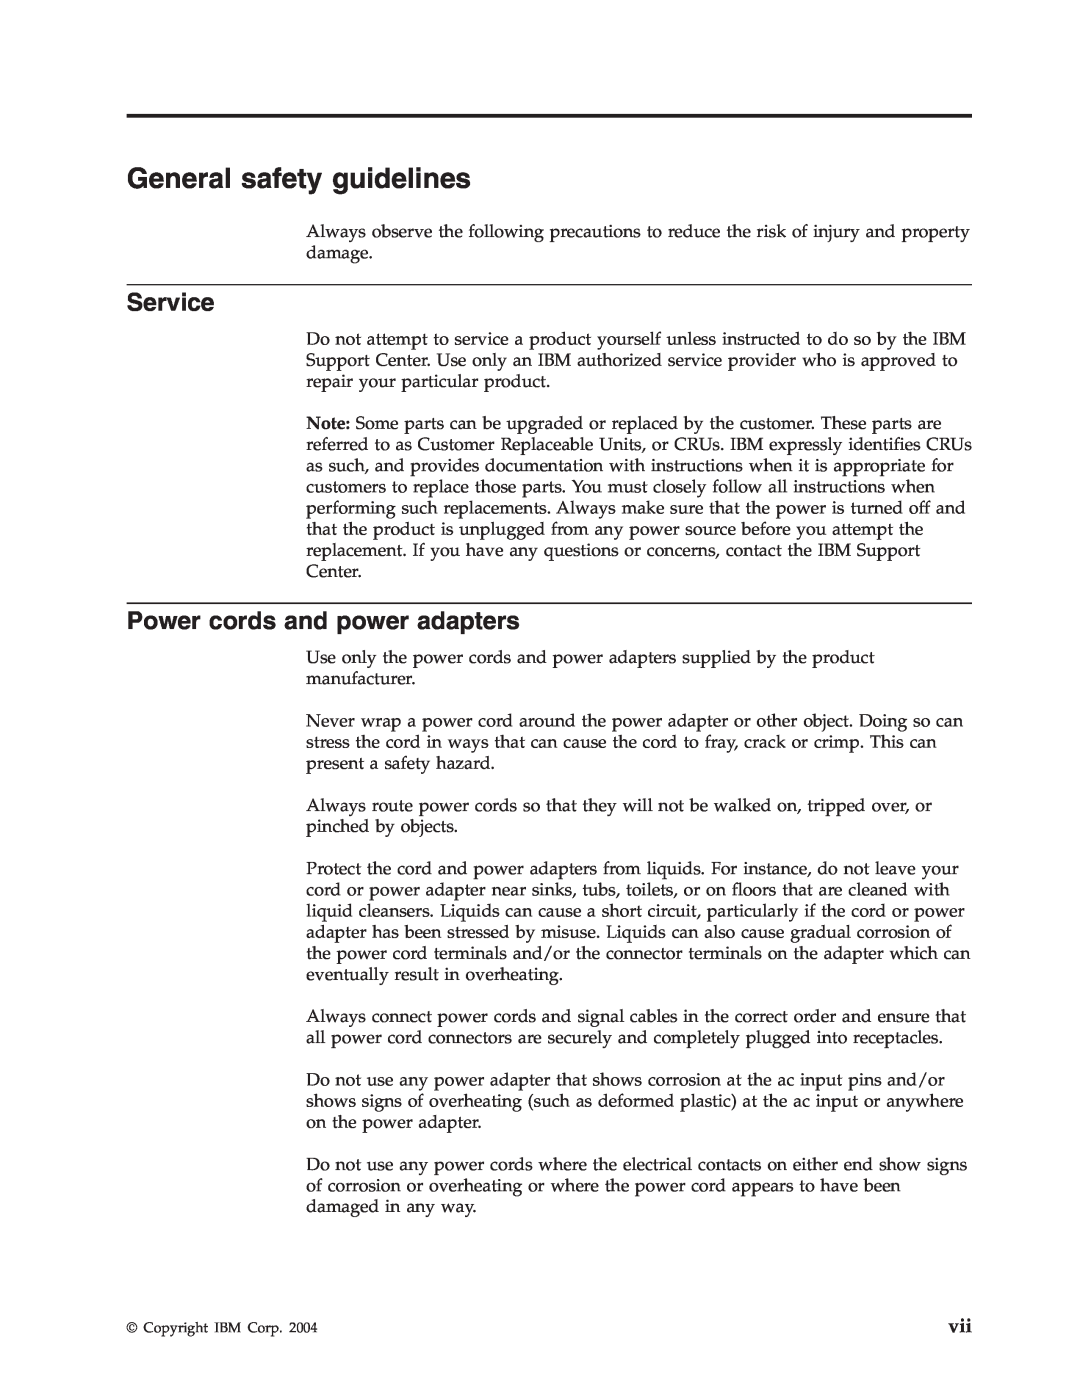 IBM 73P3292 manual General safety guidelines, Service, Power cords and power adapters 